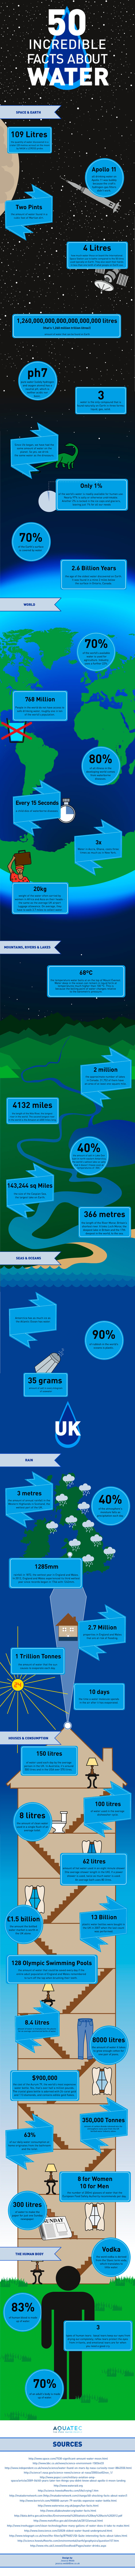 50-incredible-facts-about-water